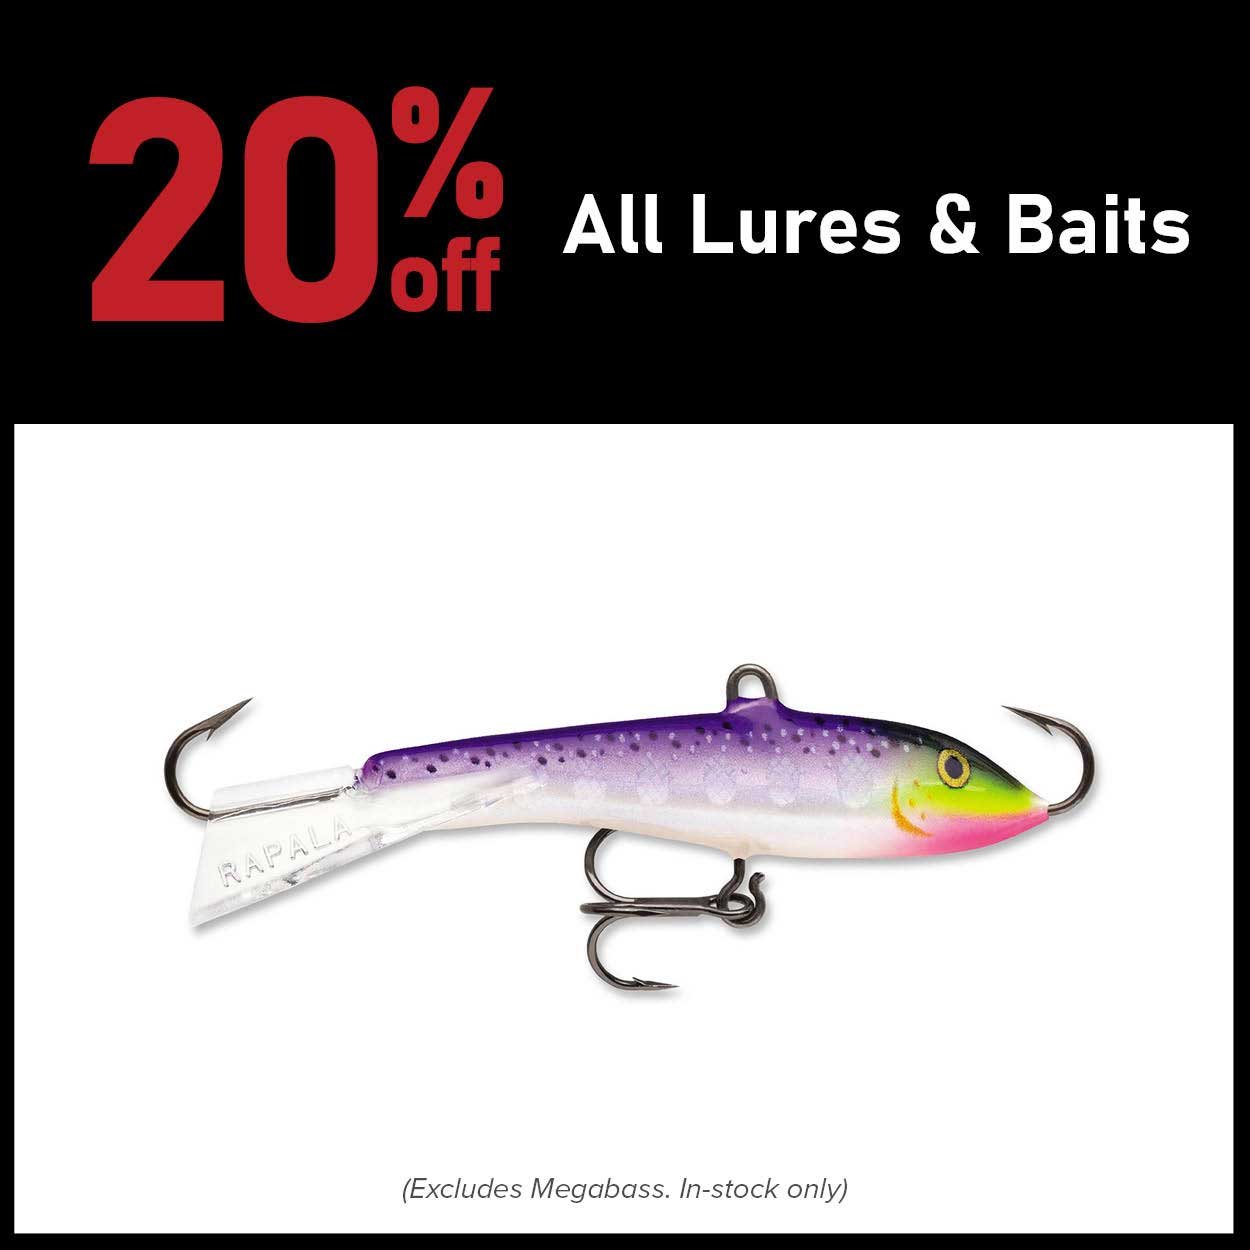 FishUSA: All Lures & Baits Are 20% Off Right Now, Plus More Huge Deals